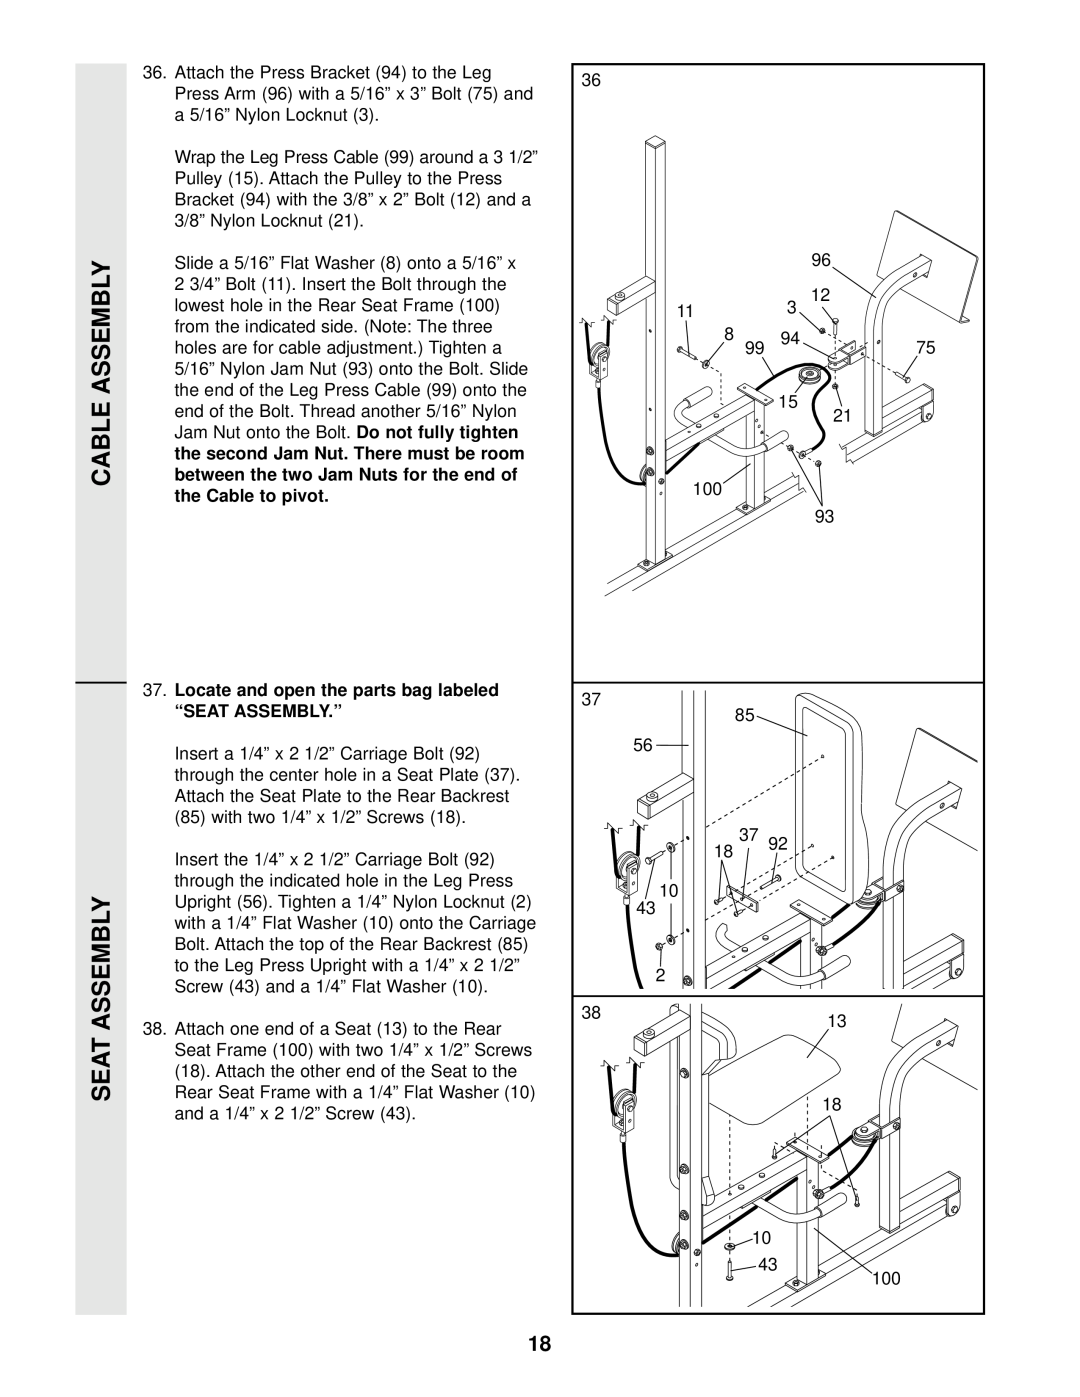 Weider WESY96400 user manual Cable Assembly Seat Assembly, Locate and open the parts bag labeled “SEAT ASSEMBLY.” 